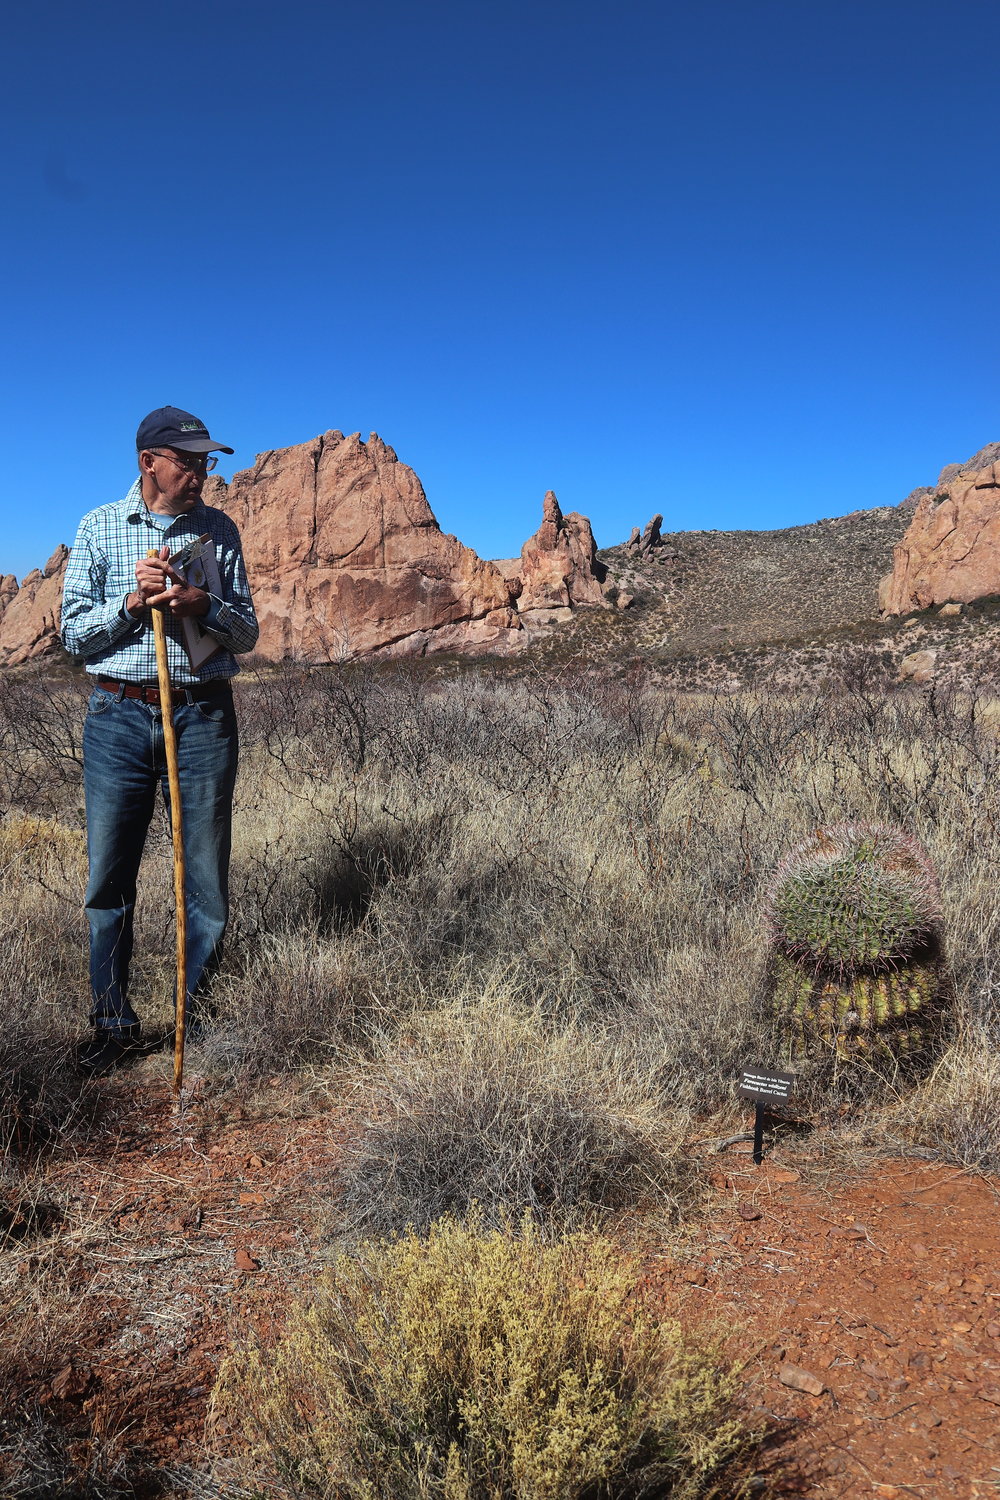 John Freyermuth, the leader of a Sunday nature walk, points out an unusual barrel cactus which has been weather damaged.